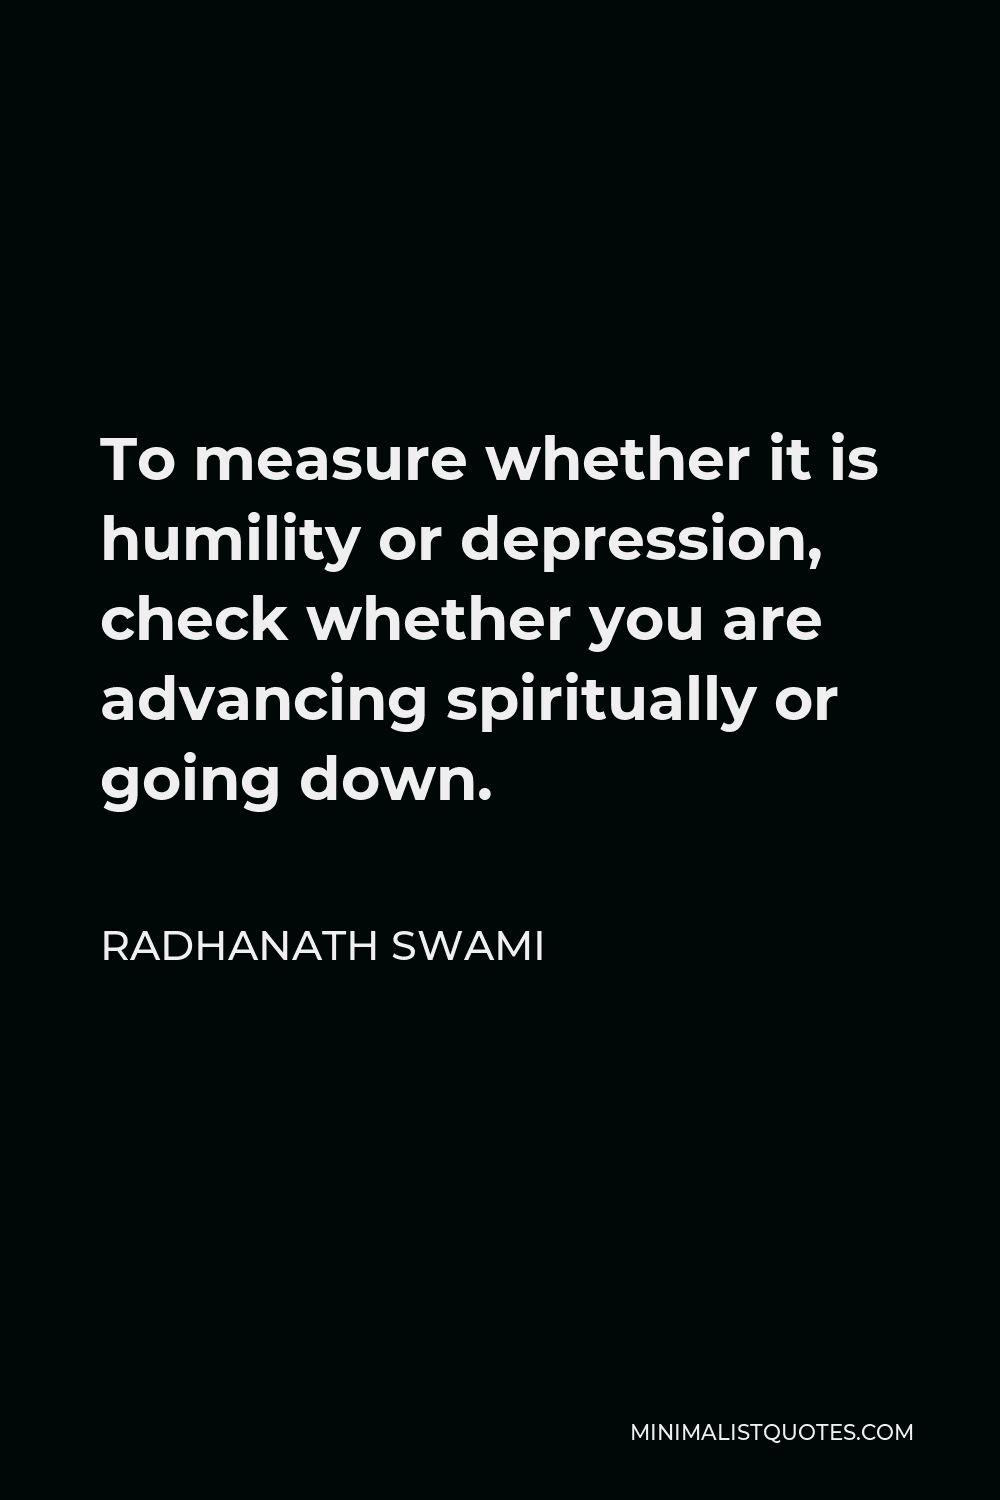 Radhanath Swami Quote - To measure whether it is humility or depression, check whether you are advancing spiritually or going down.